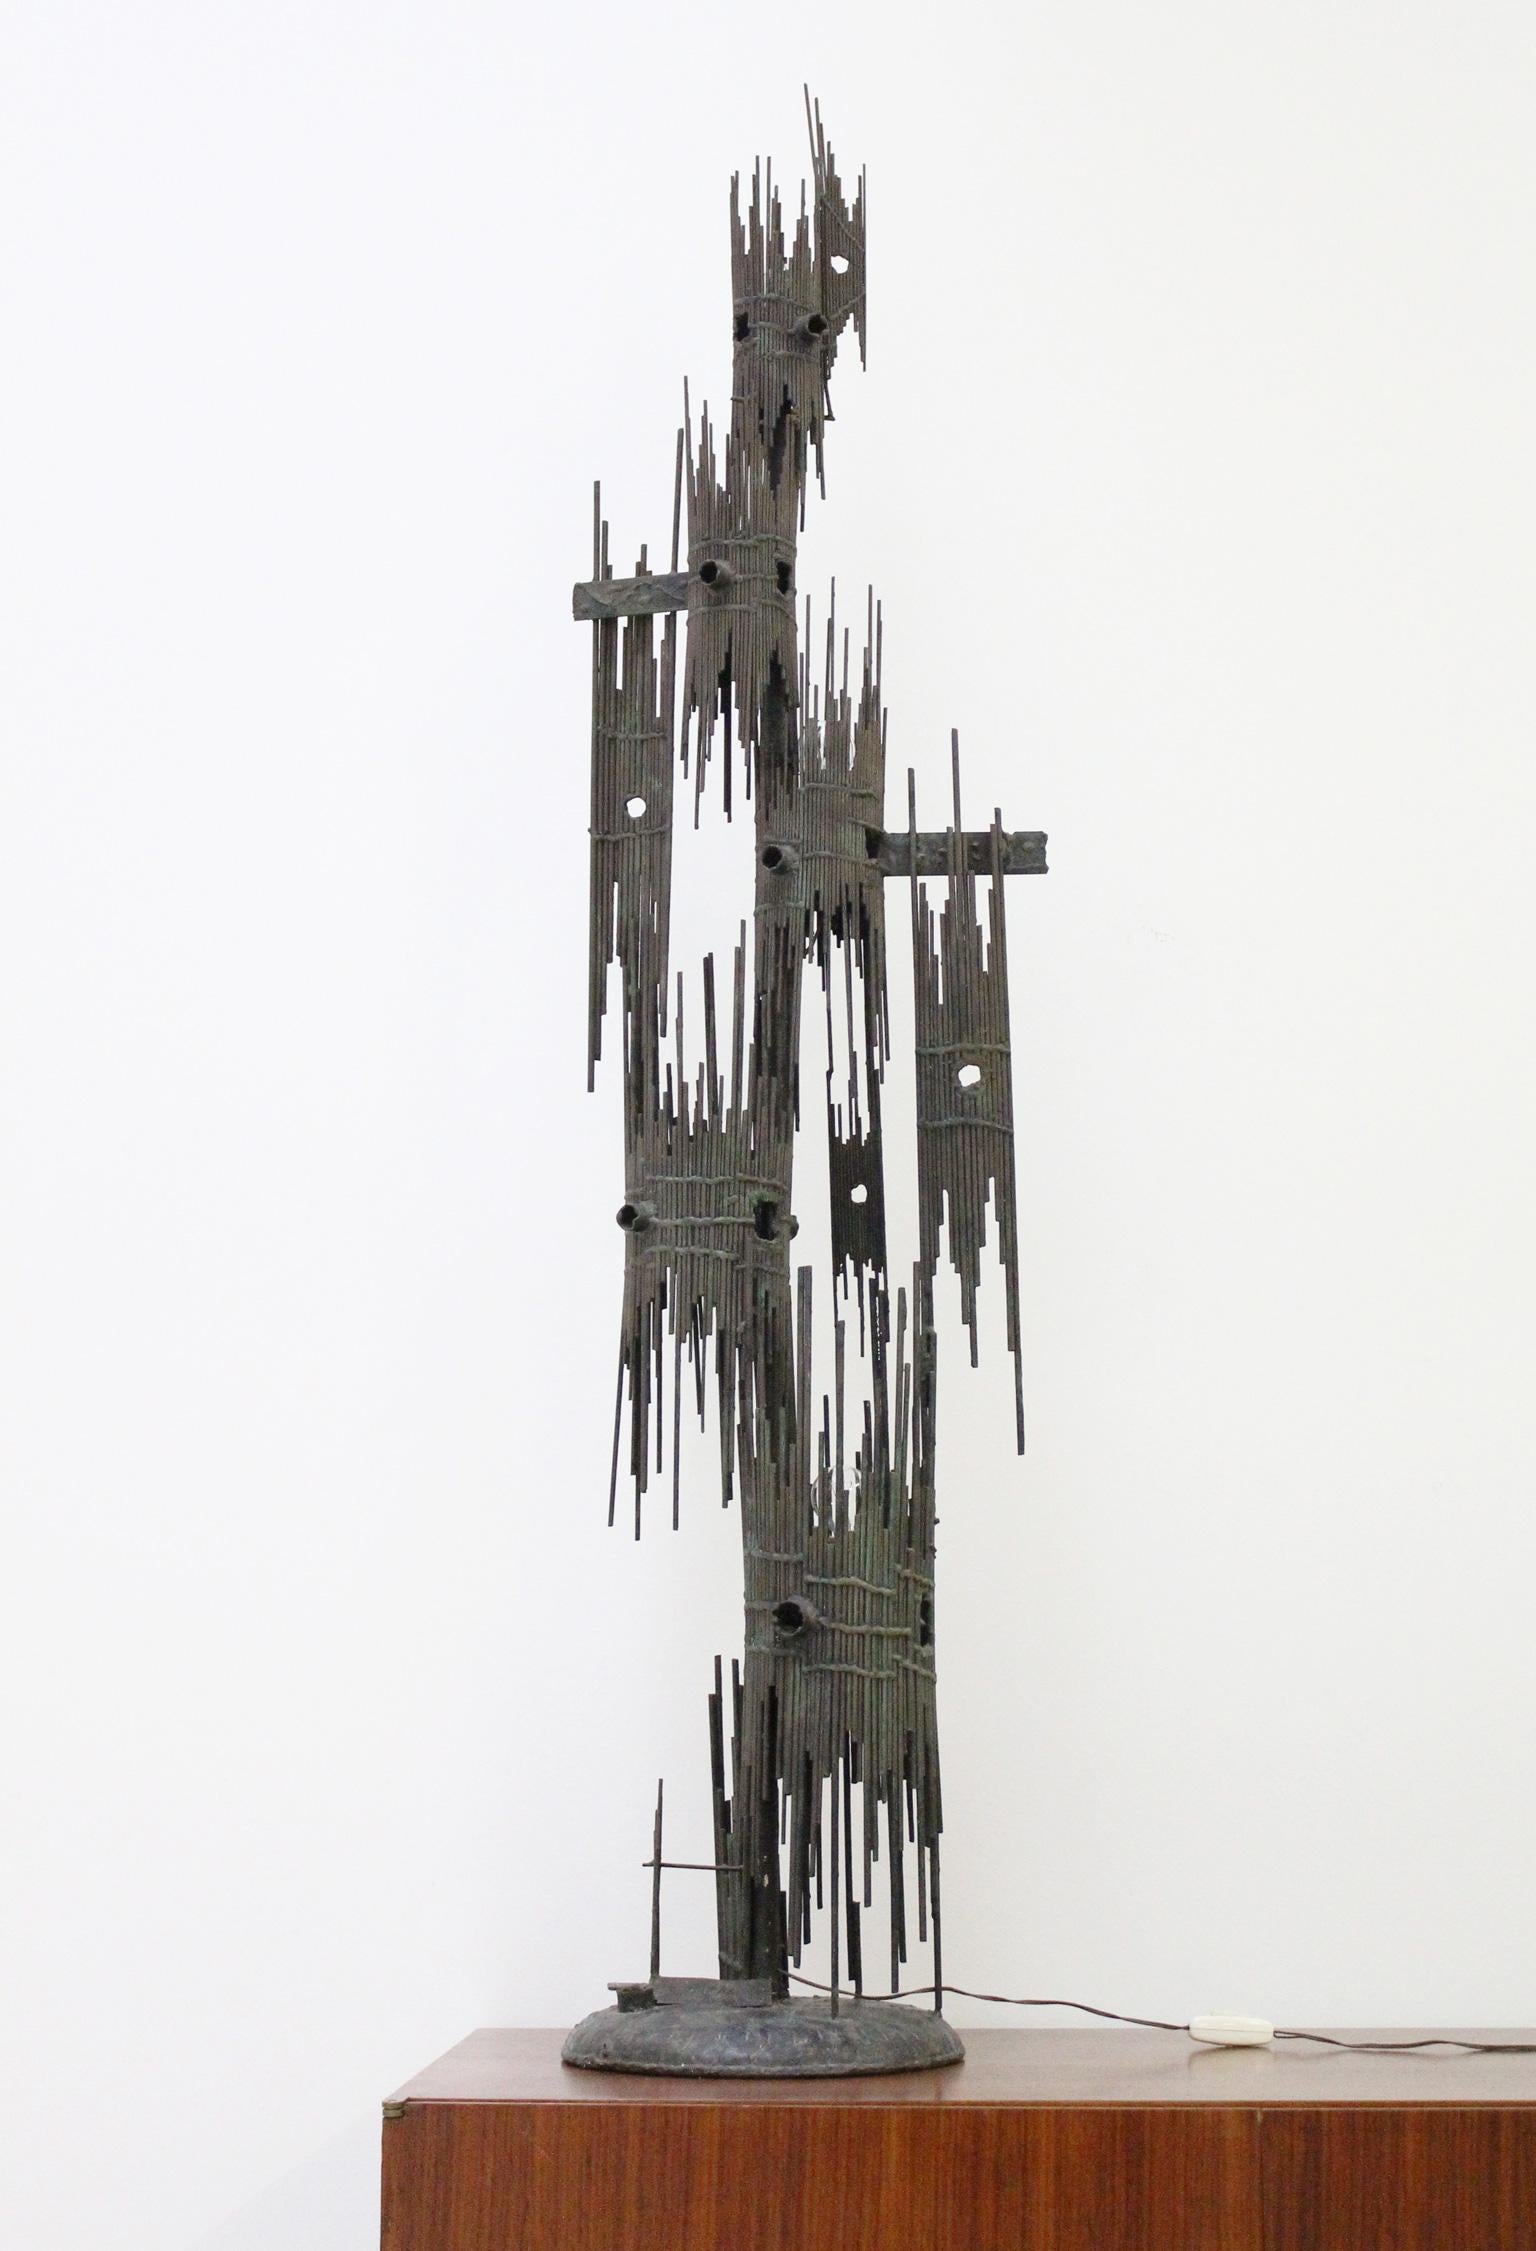 Large iluminated sculpture by Di Giovanni, Italy, 1960's. Brutalist sculptural forms made of iron rods welded together. Signed by M. Di Giovanni.